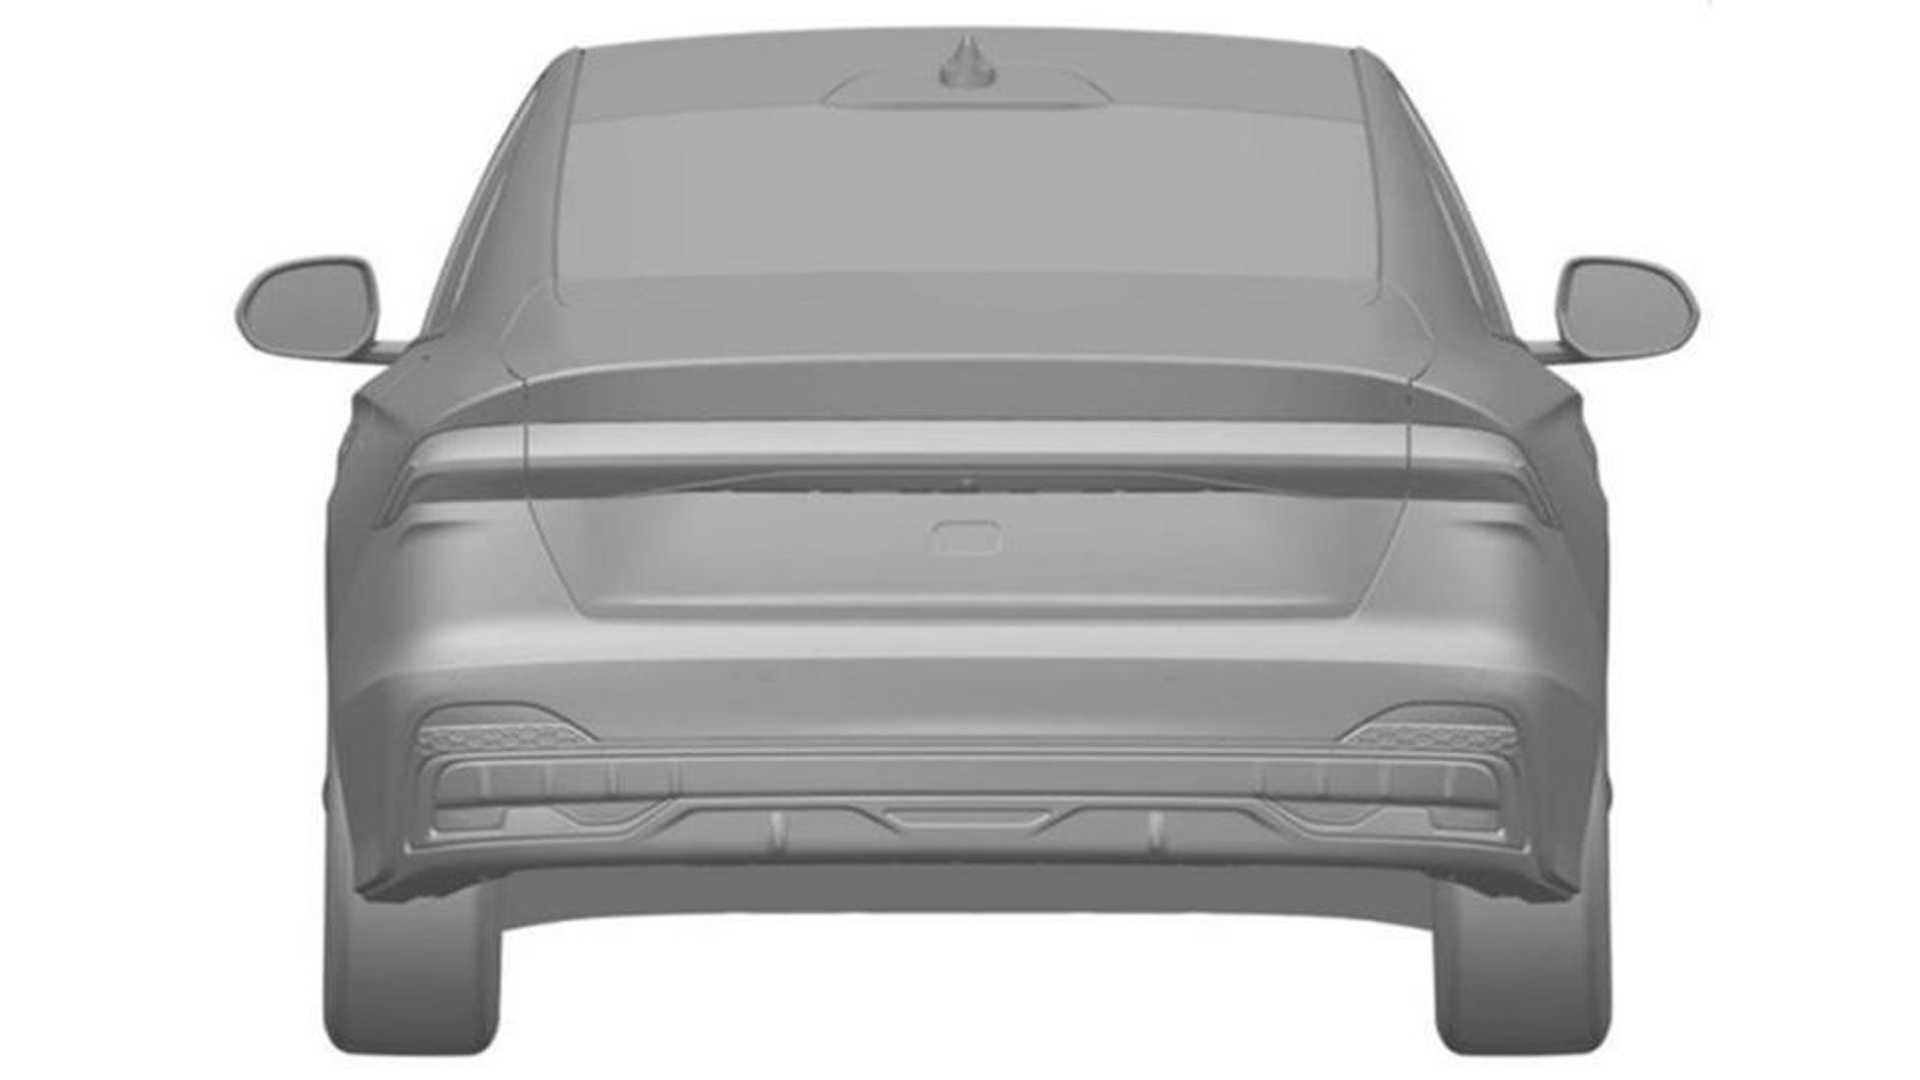 lincoln-zephyr-rear-view-patent-image3.jpg